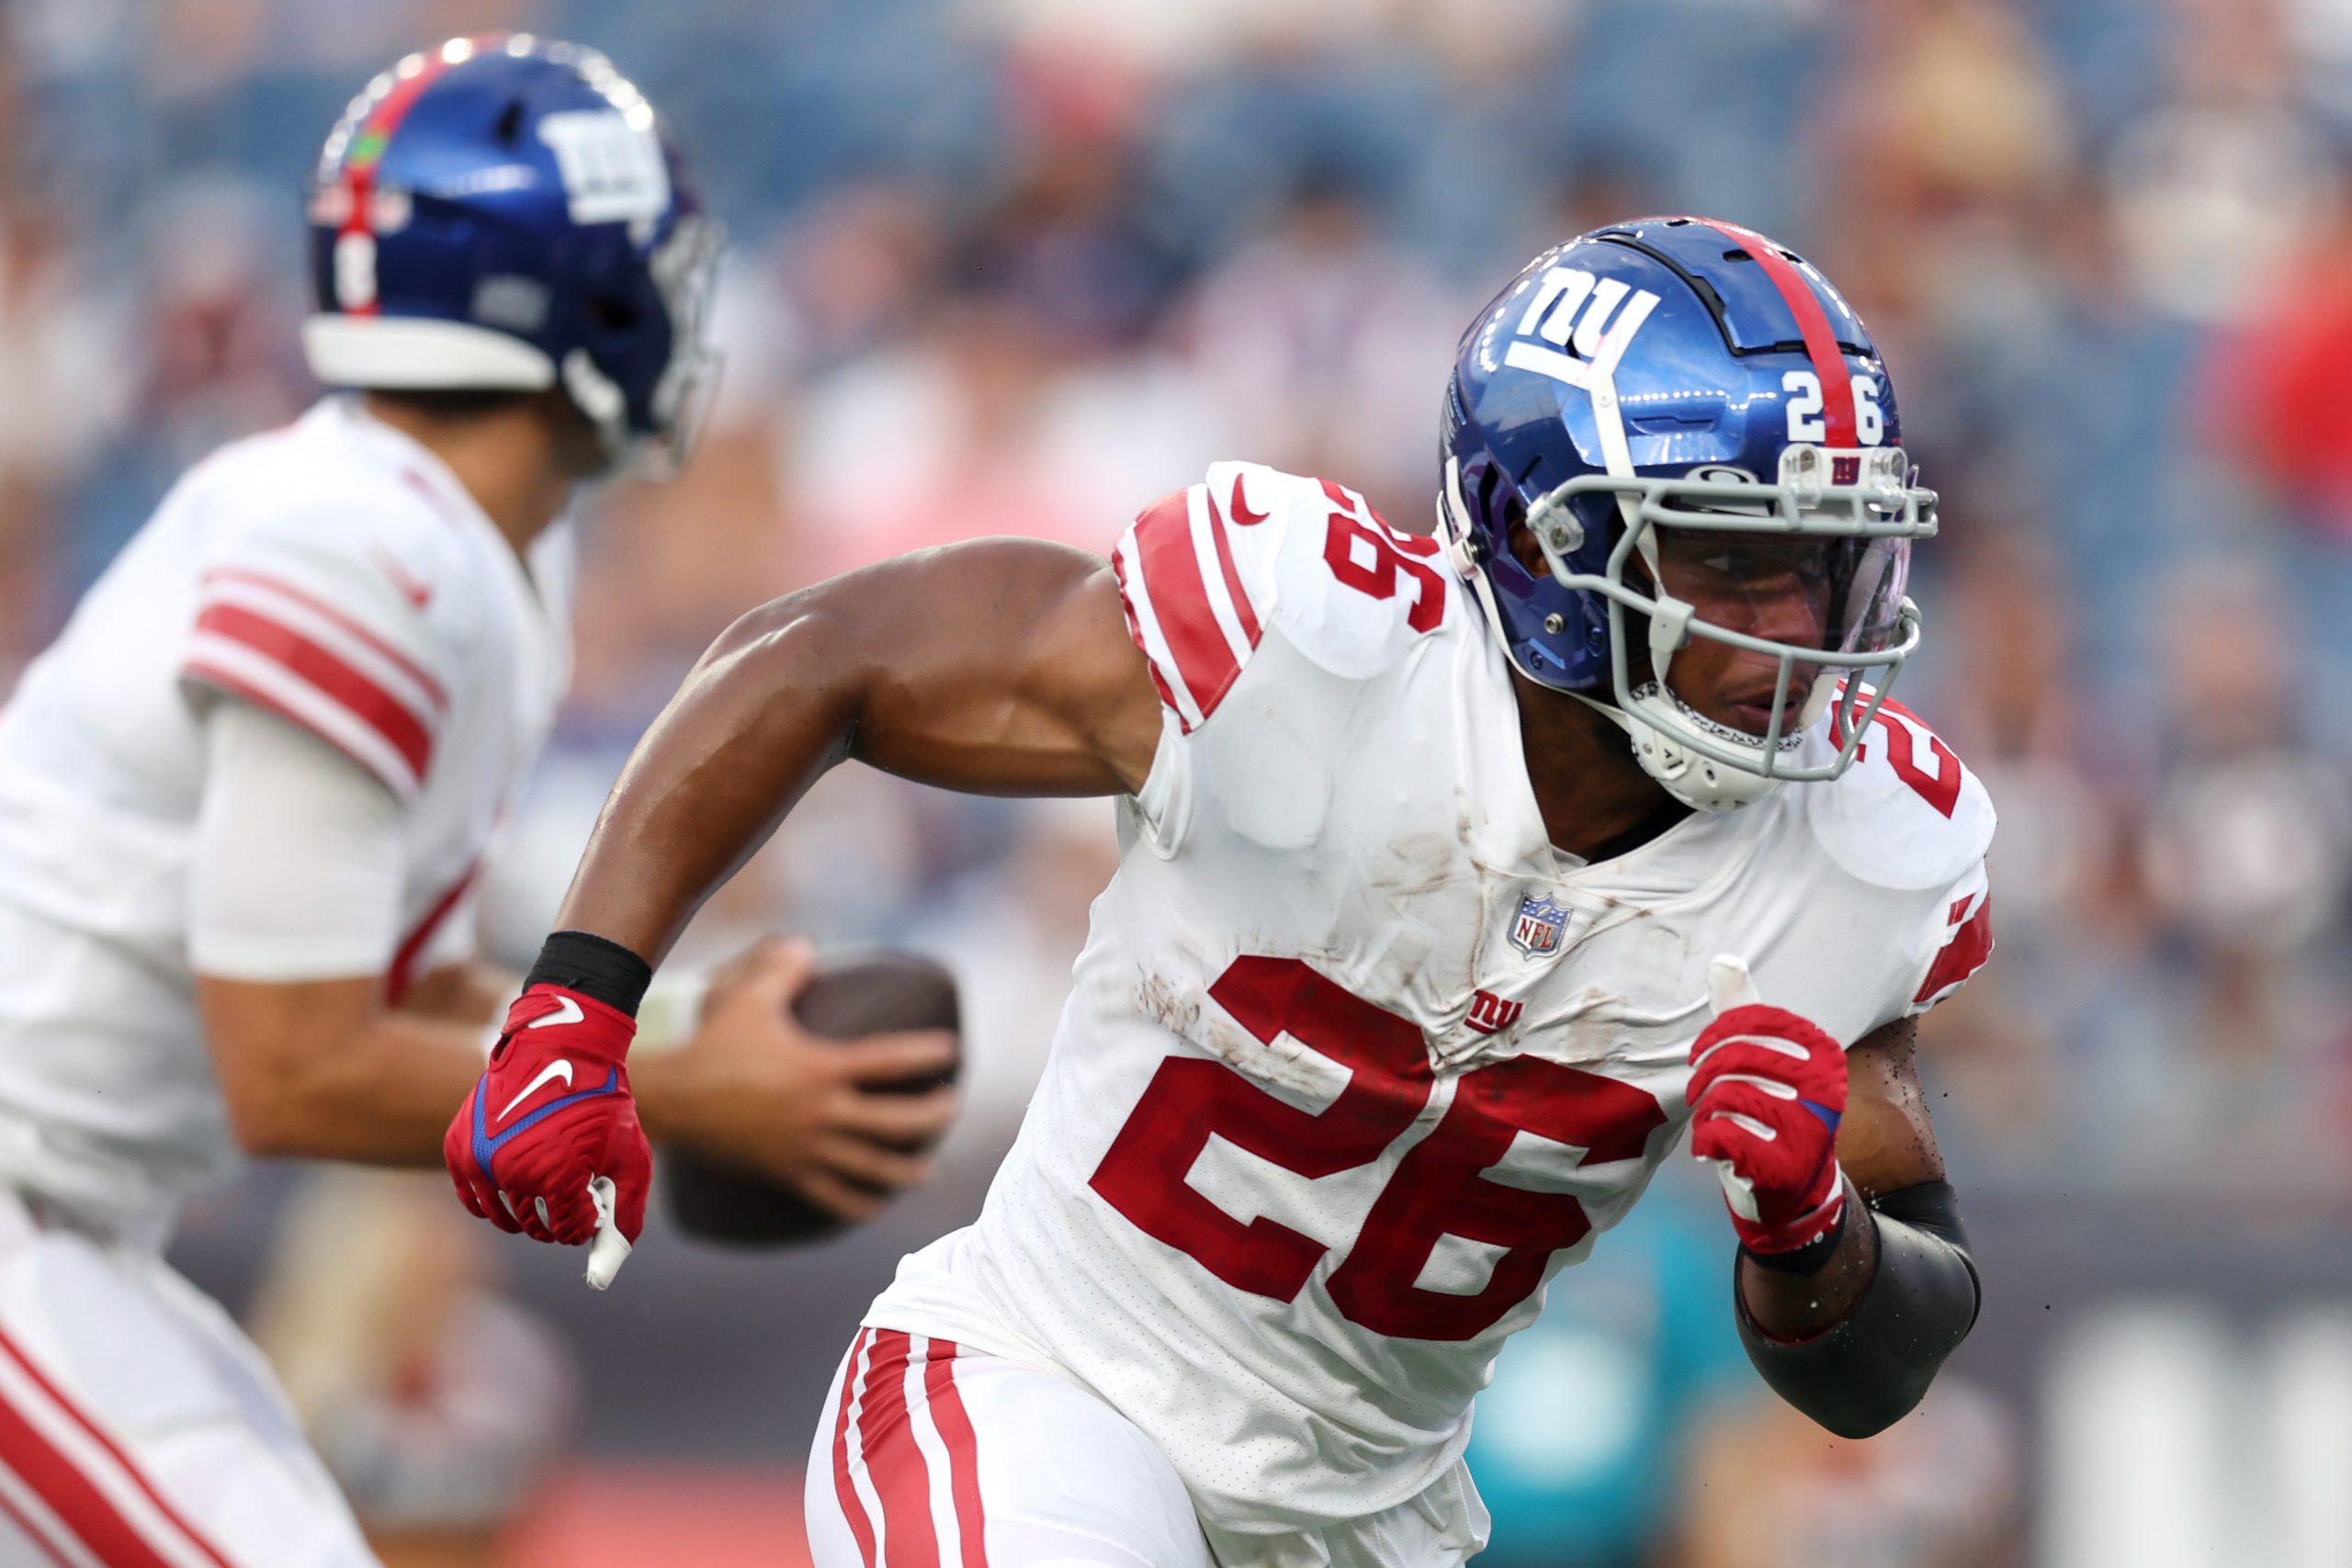 Saquon Barkley of the New York Giants makes a run during the preseason game against the New York Gi...